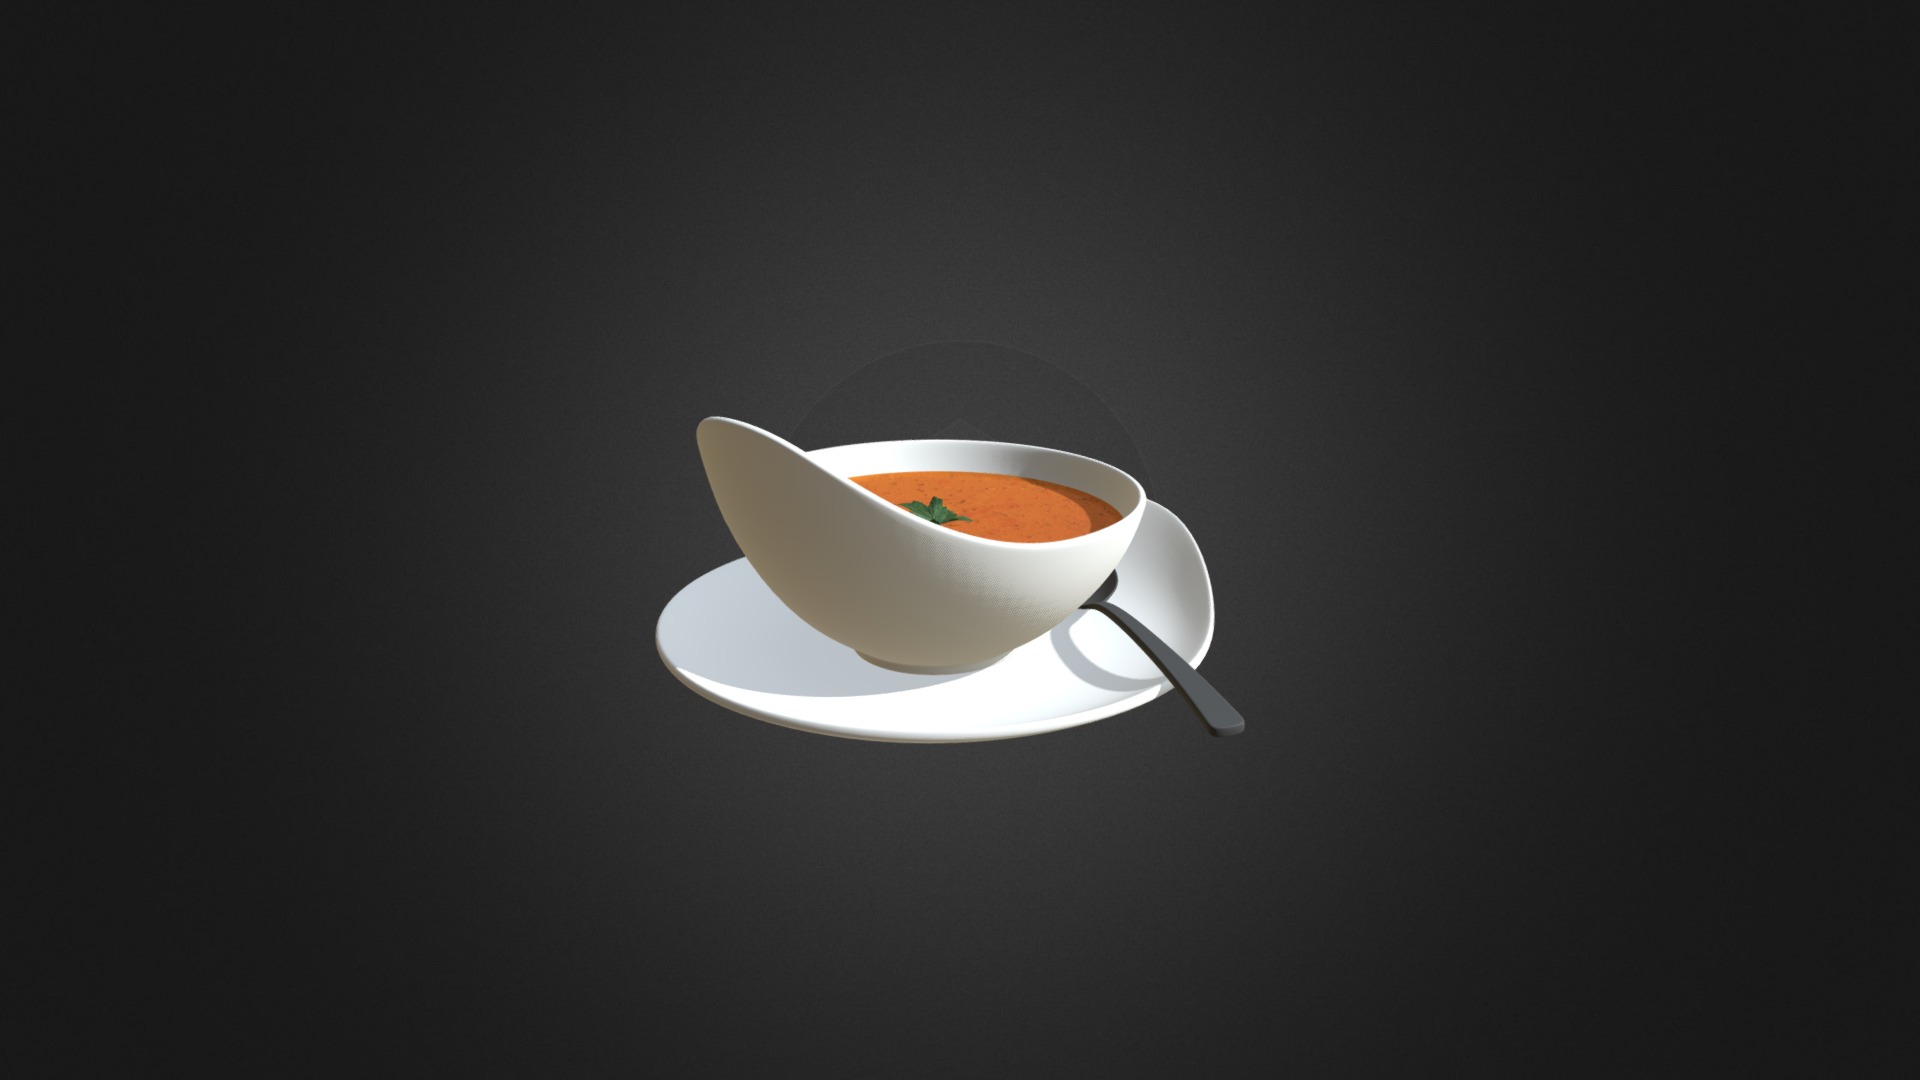 3D model Tomato Soup - This is a 3D model of the Tomato Soup. The 3D model is about a white cup with a red liquid in it.